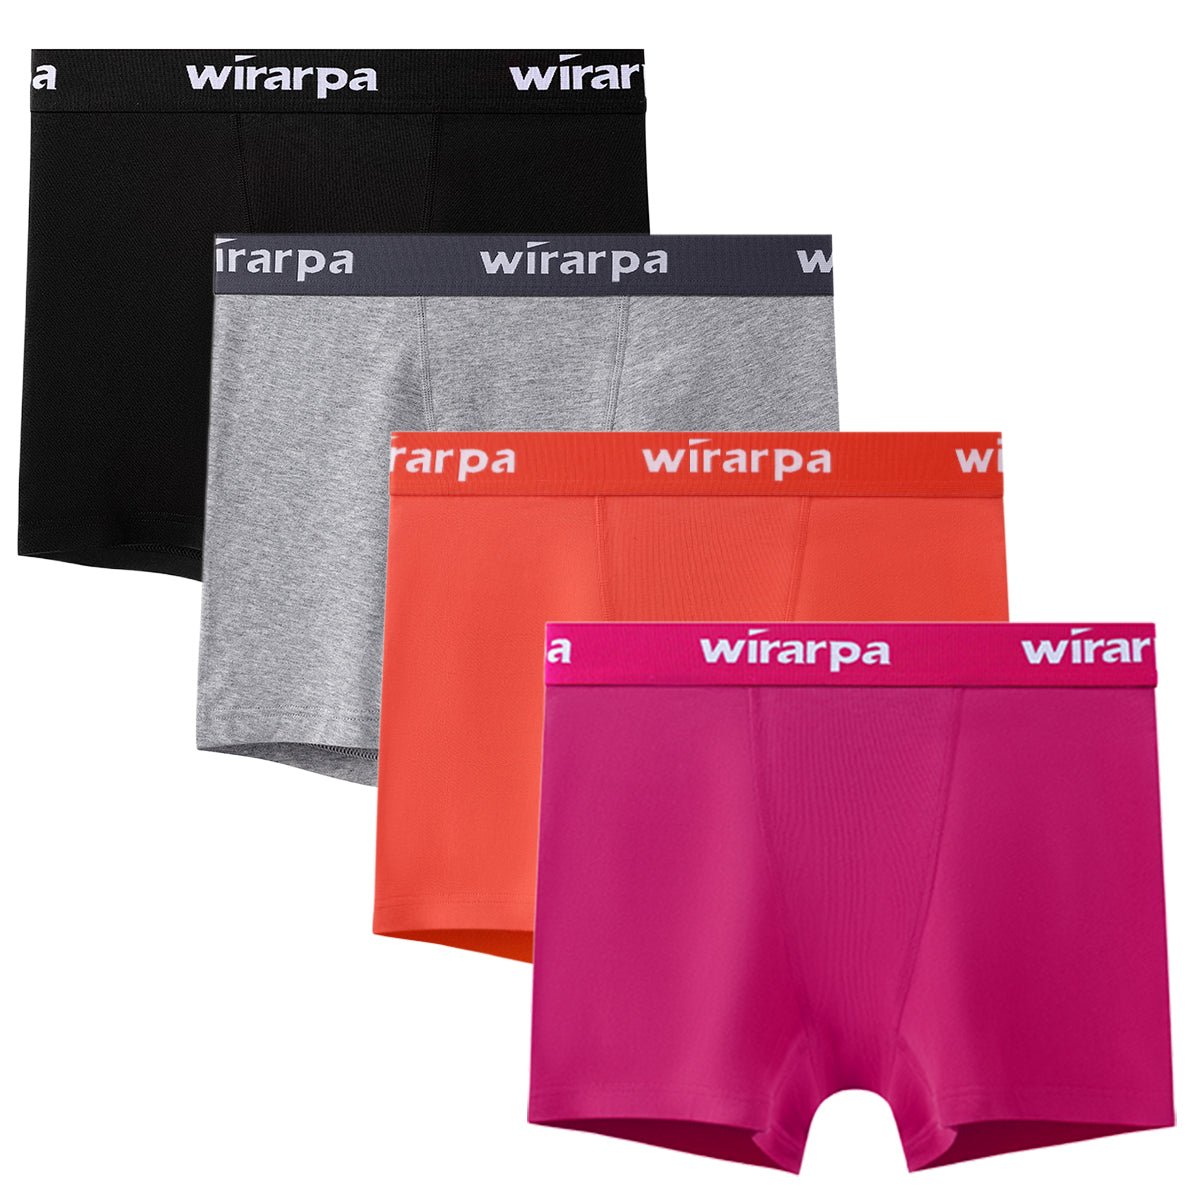  Wirarpa Womens Boxer Briefs Cotton Underwear Anti Chafing  Boy Shorts Panties 5.5 Inseam 4 Pack Assorted Small